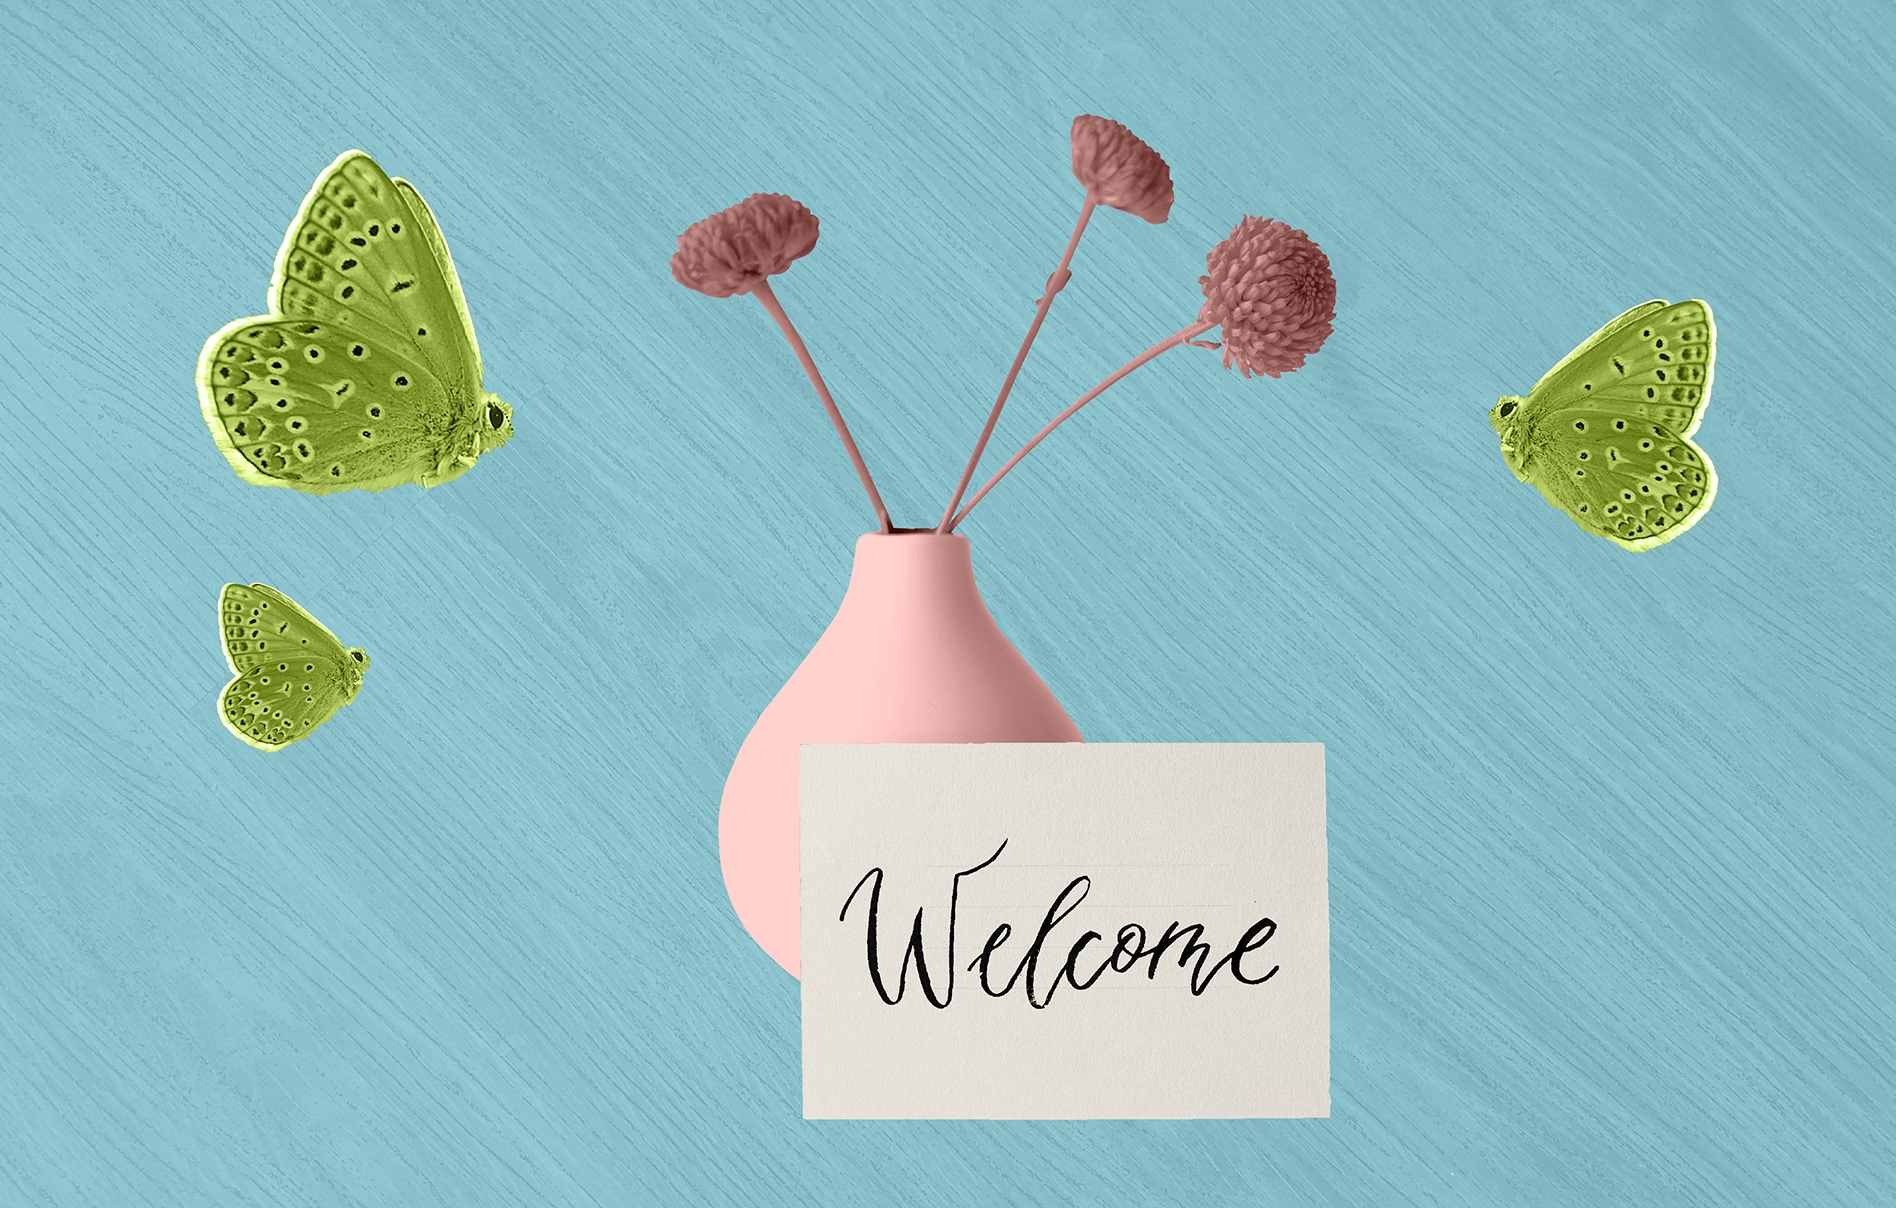 Image of a card with "welcome" written on it propped up against a vase with flowers surrounded by butterflies